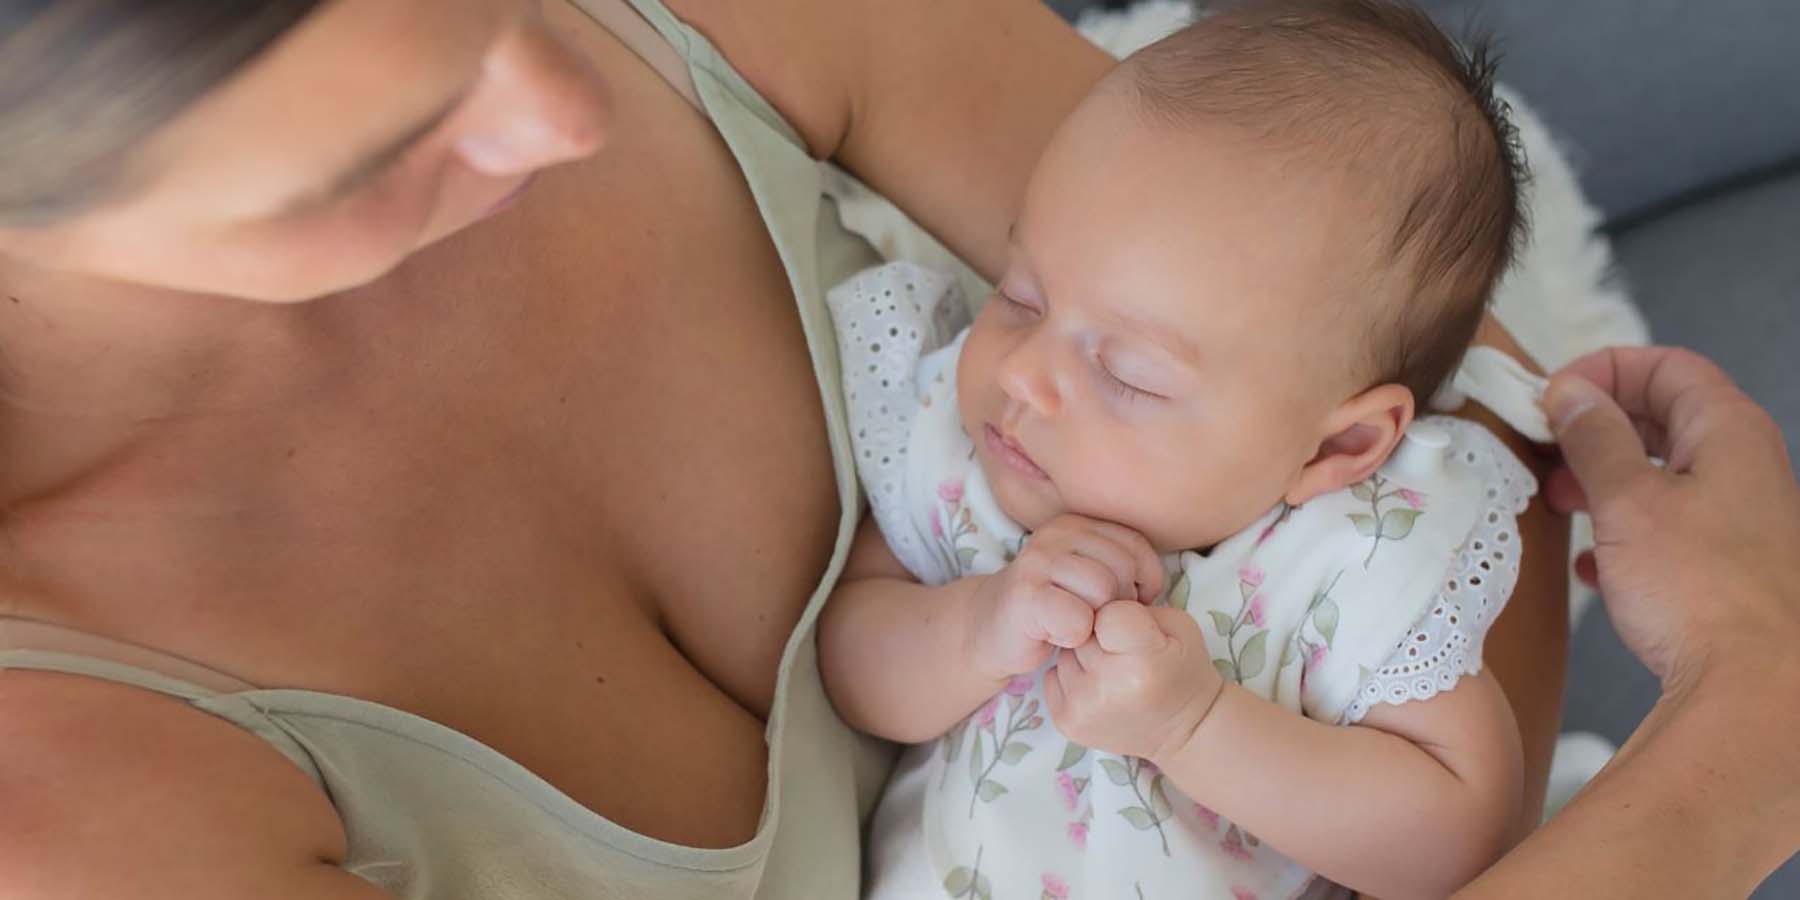 A mother holding her sleeping baby and removing her Gigi Bib with one hand.